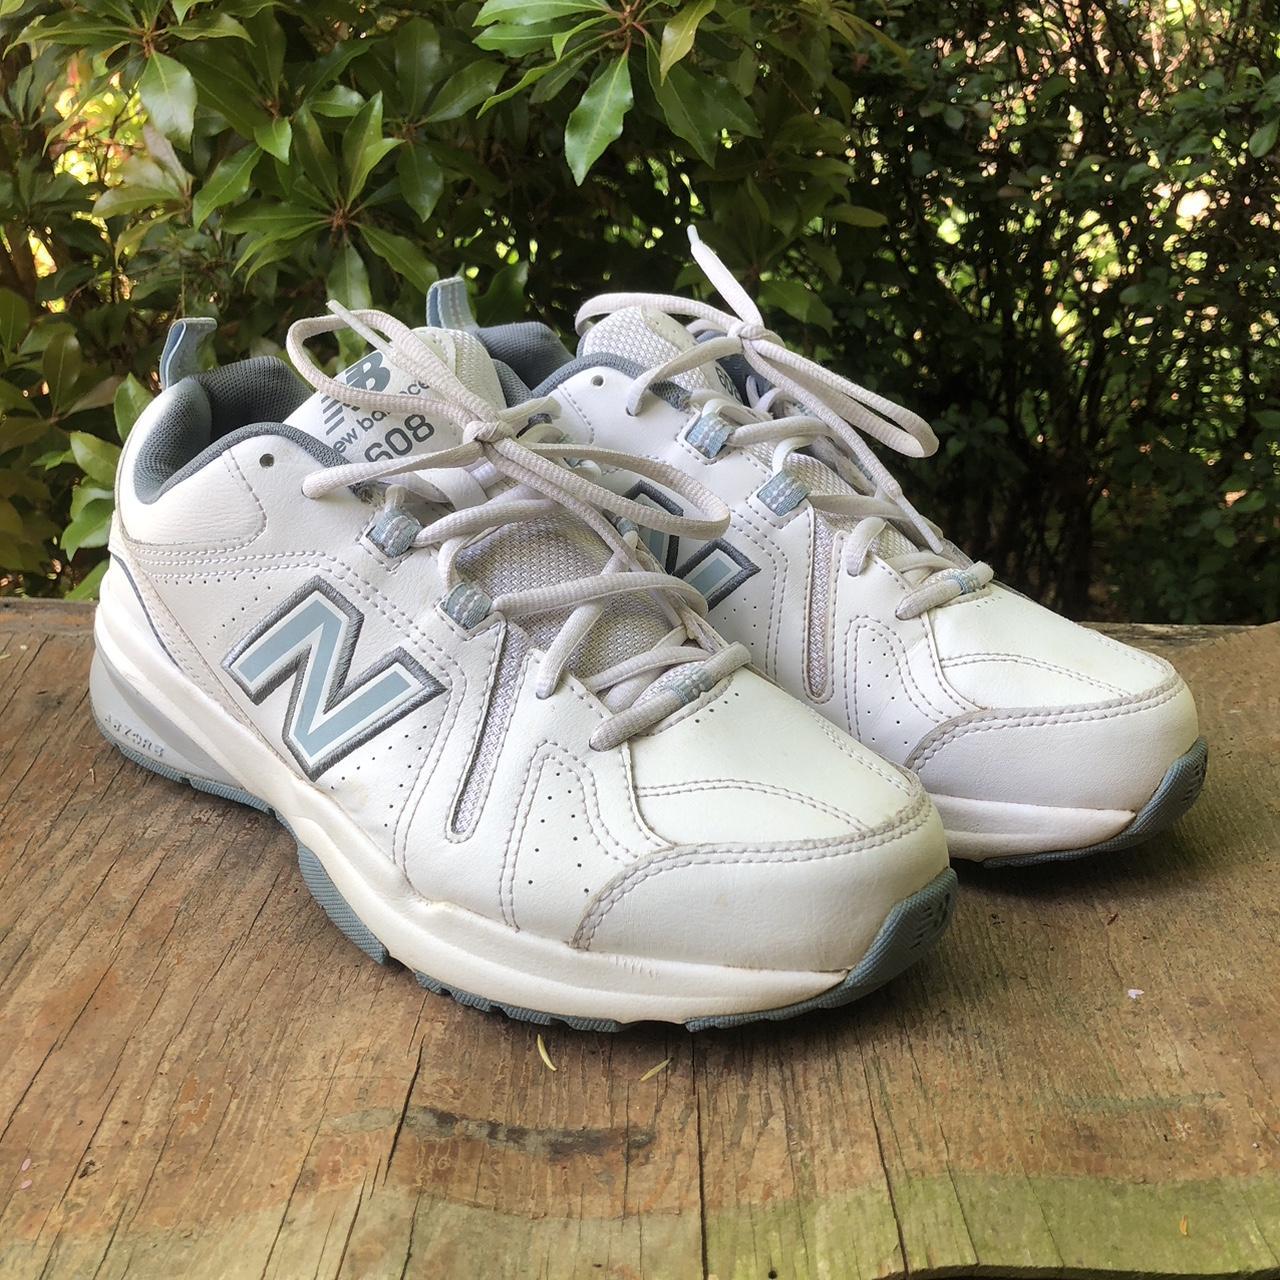 New Balance Women's White and Blue Trainers | Depop